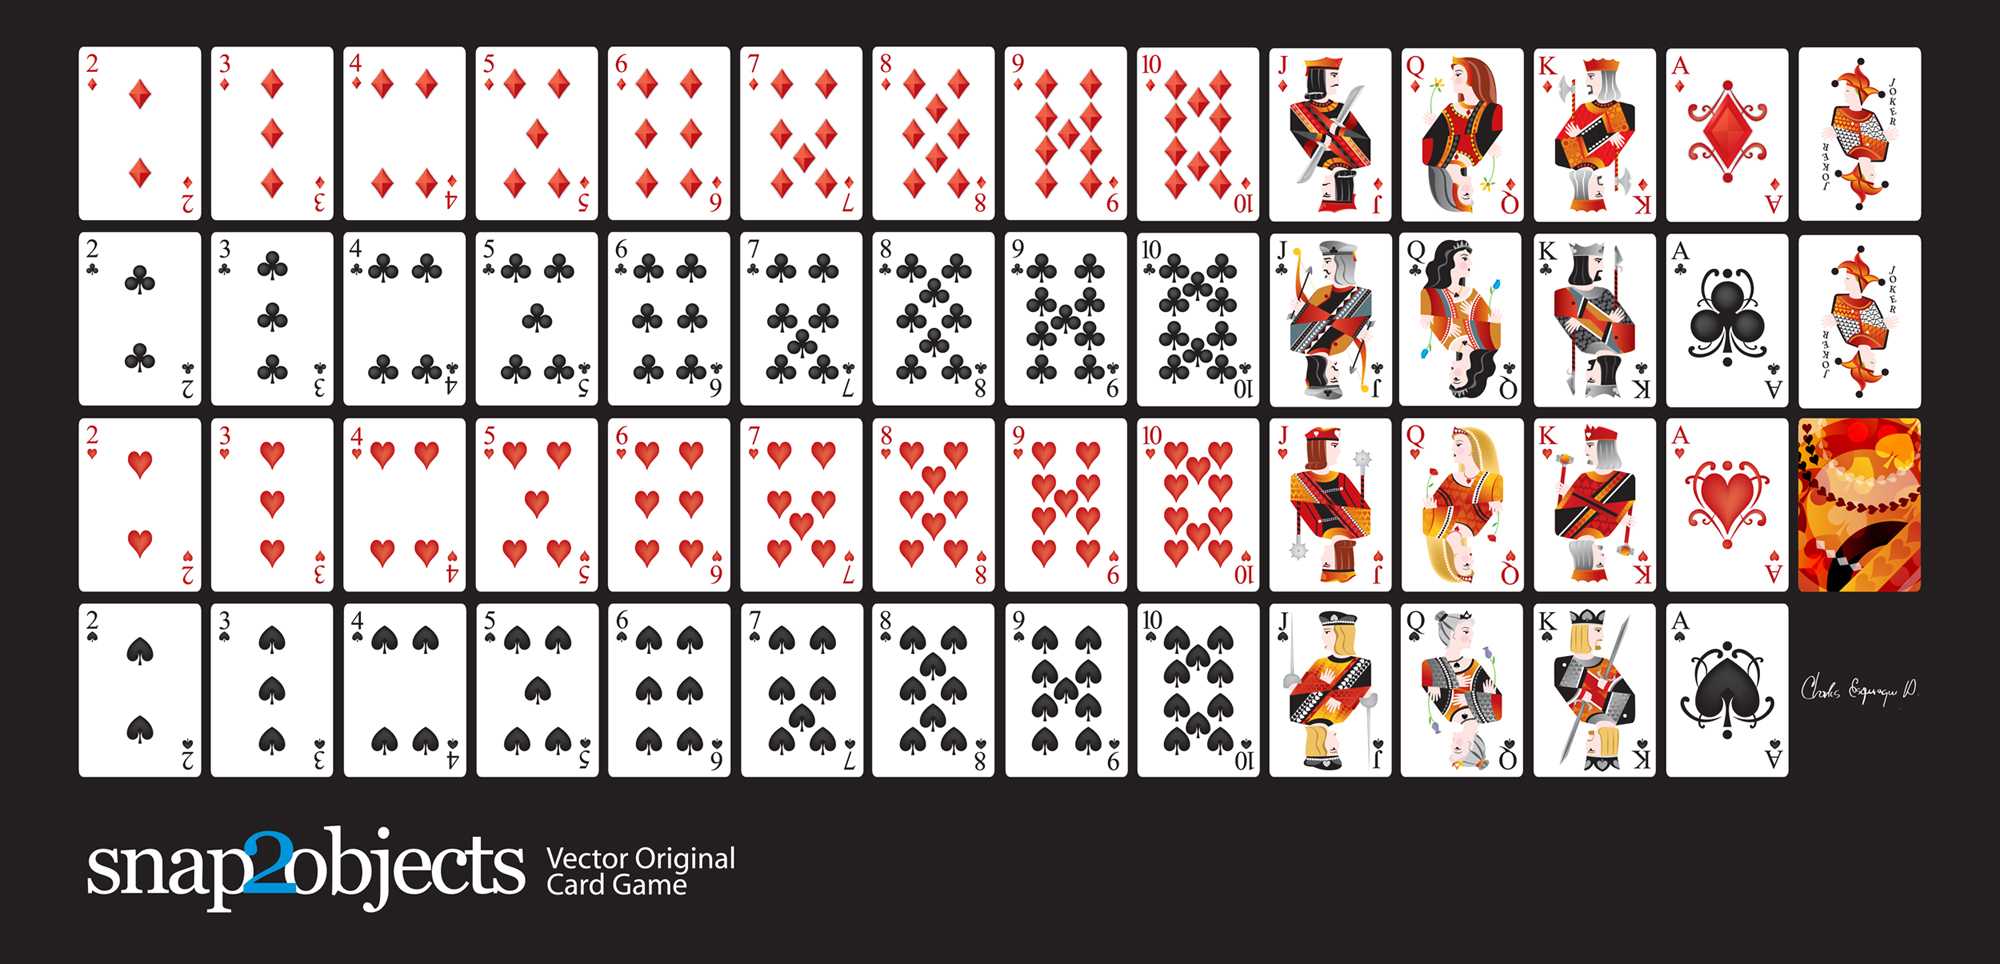 Playing Card Vector Art At Getdrawings | Free For Within Playing Card Design Template